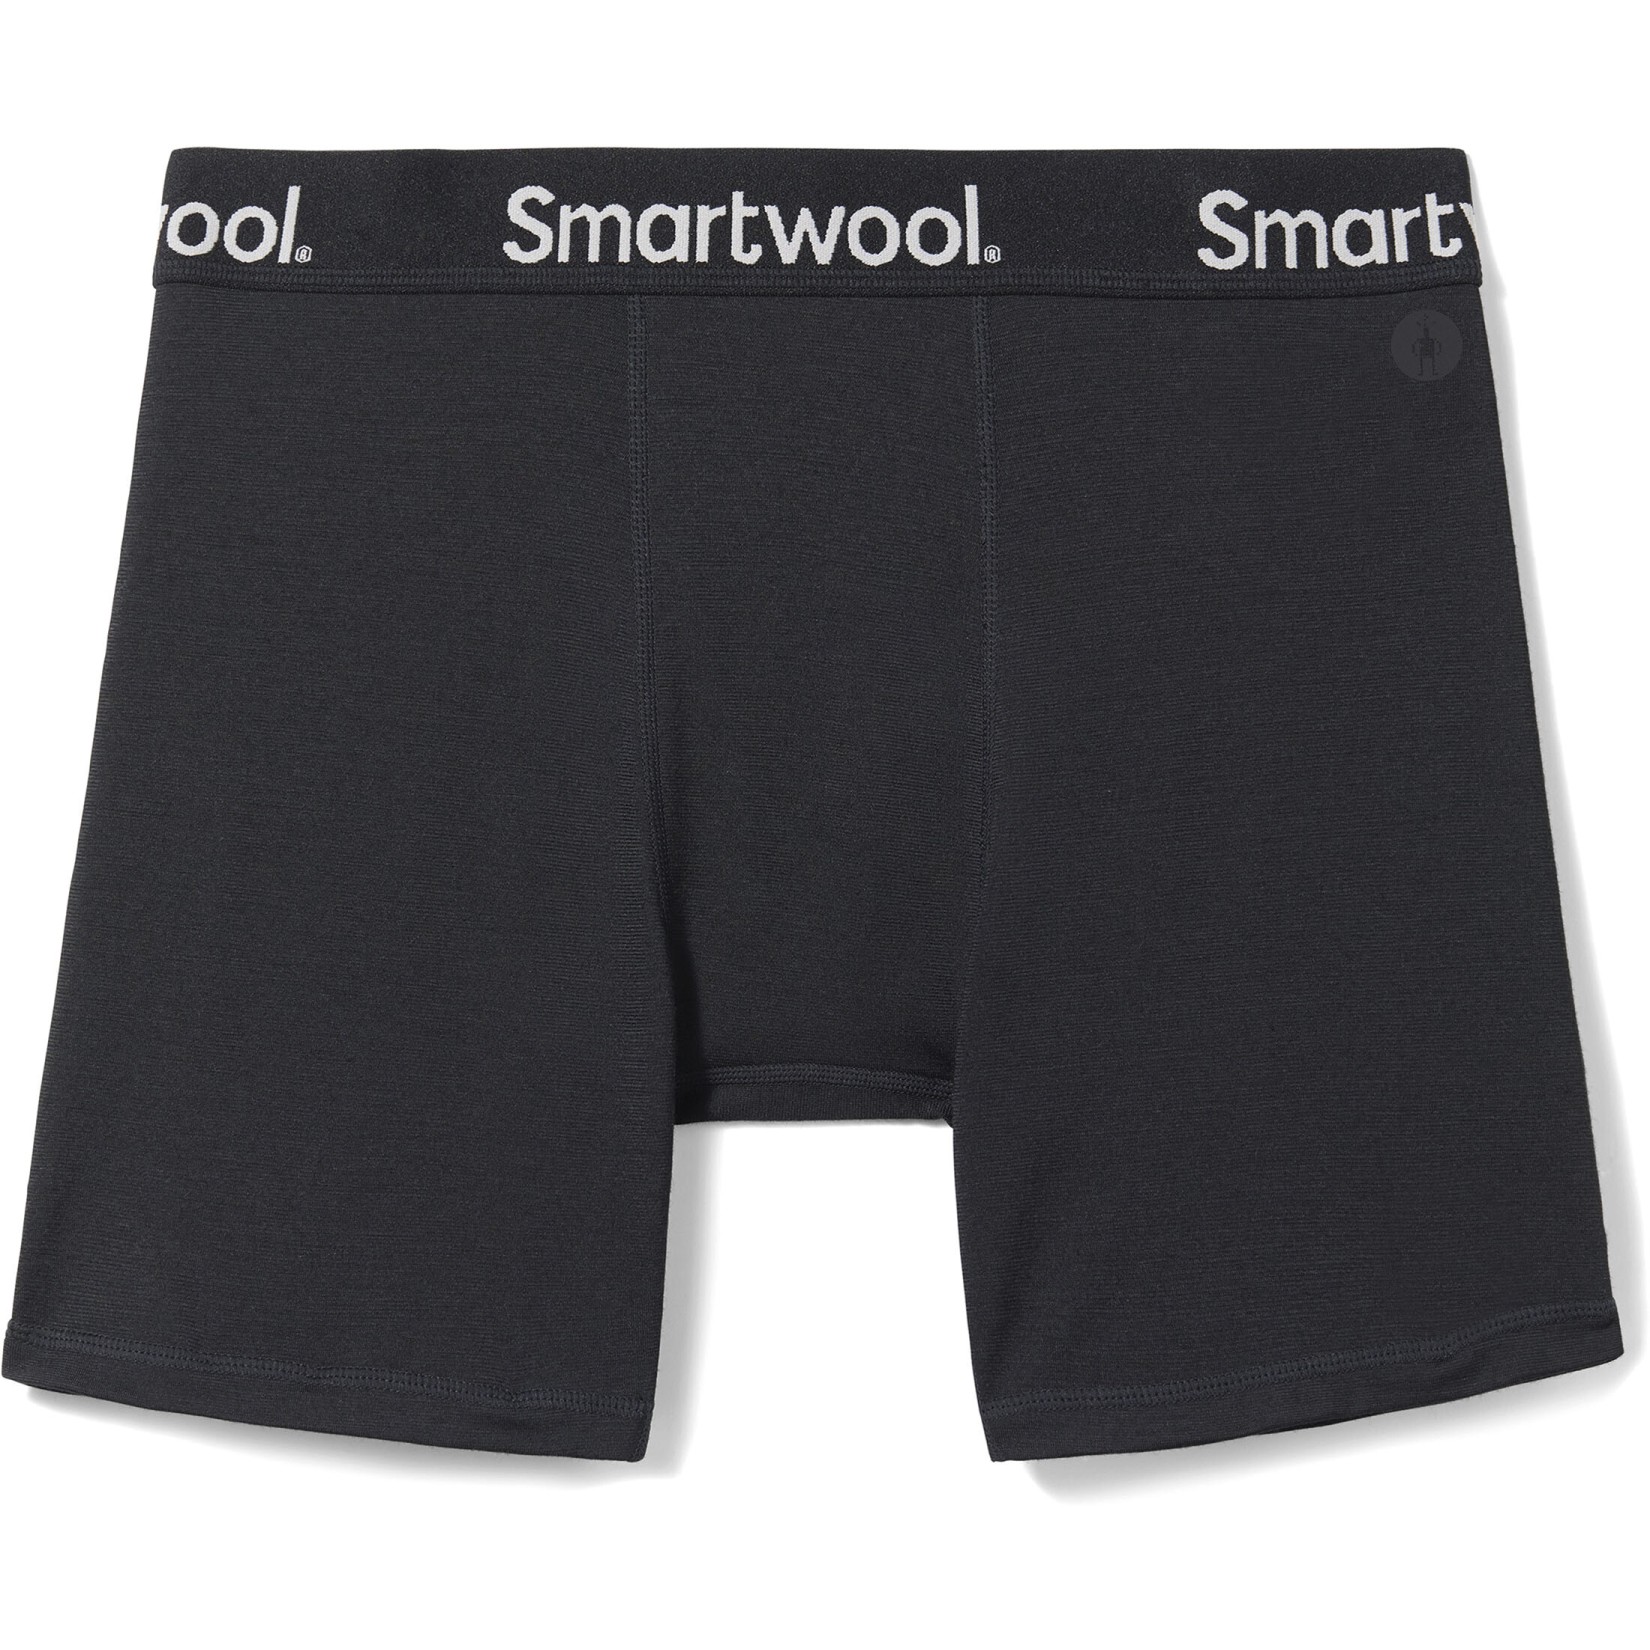 Picture of SmartWool Boxer Brief Boxed - 001 black